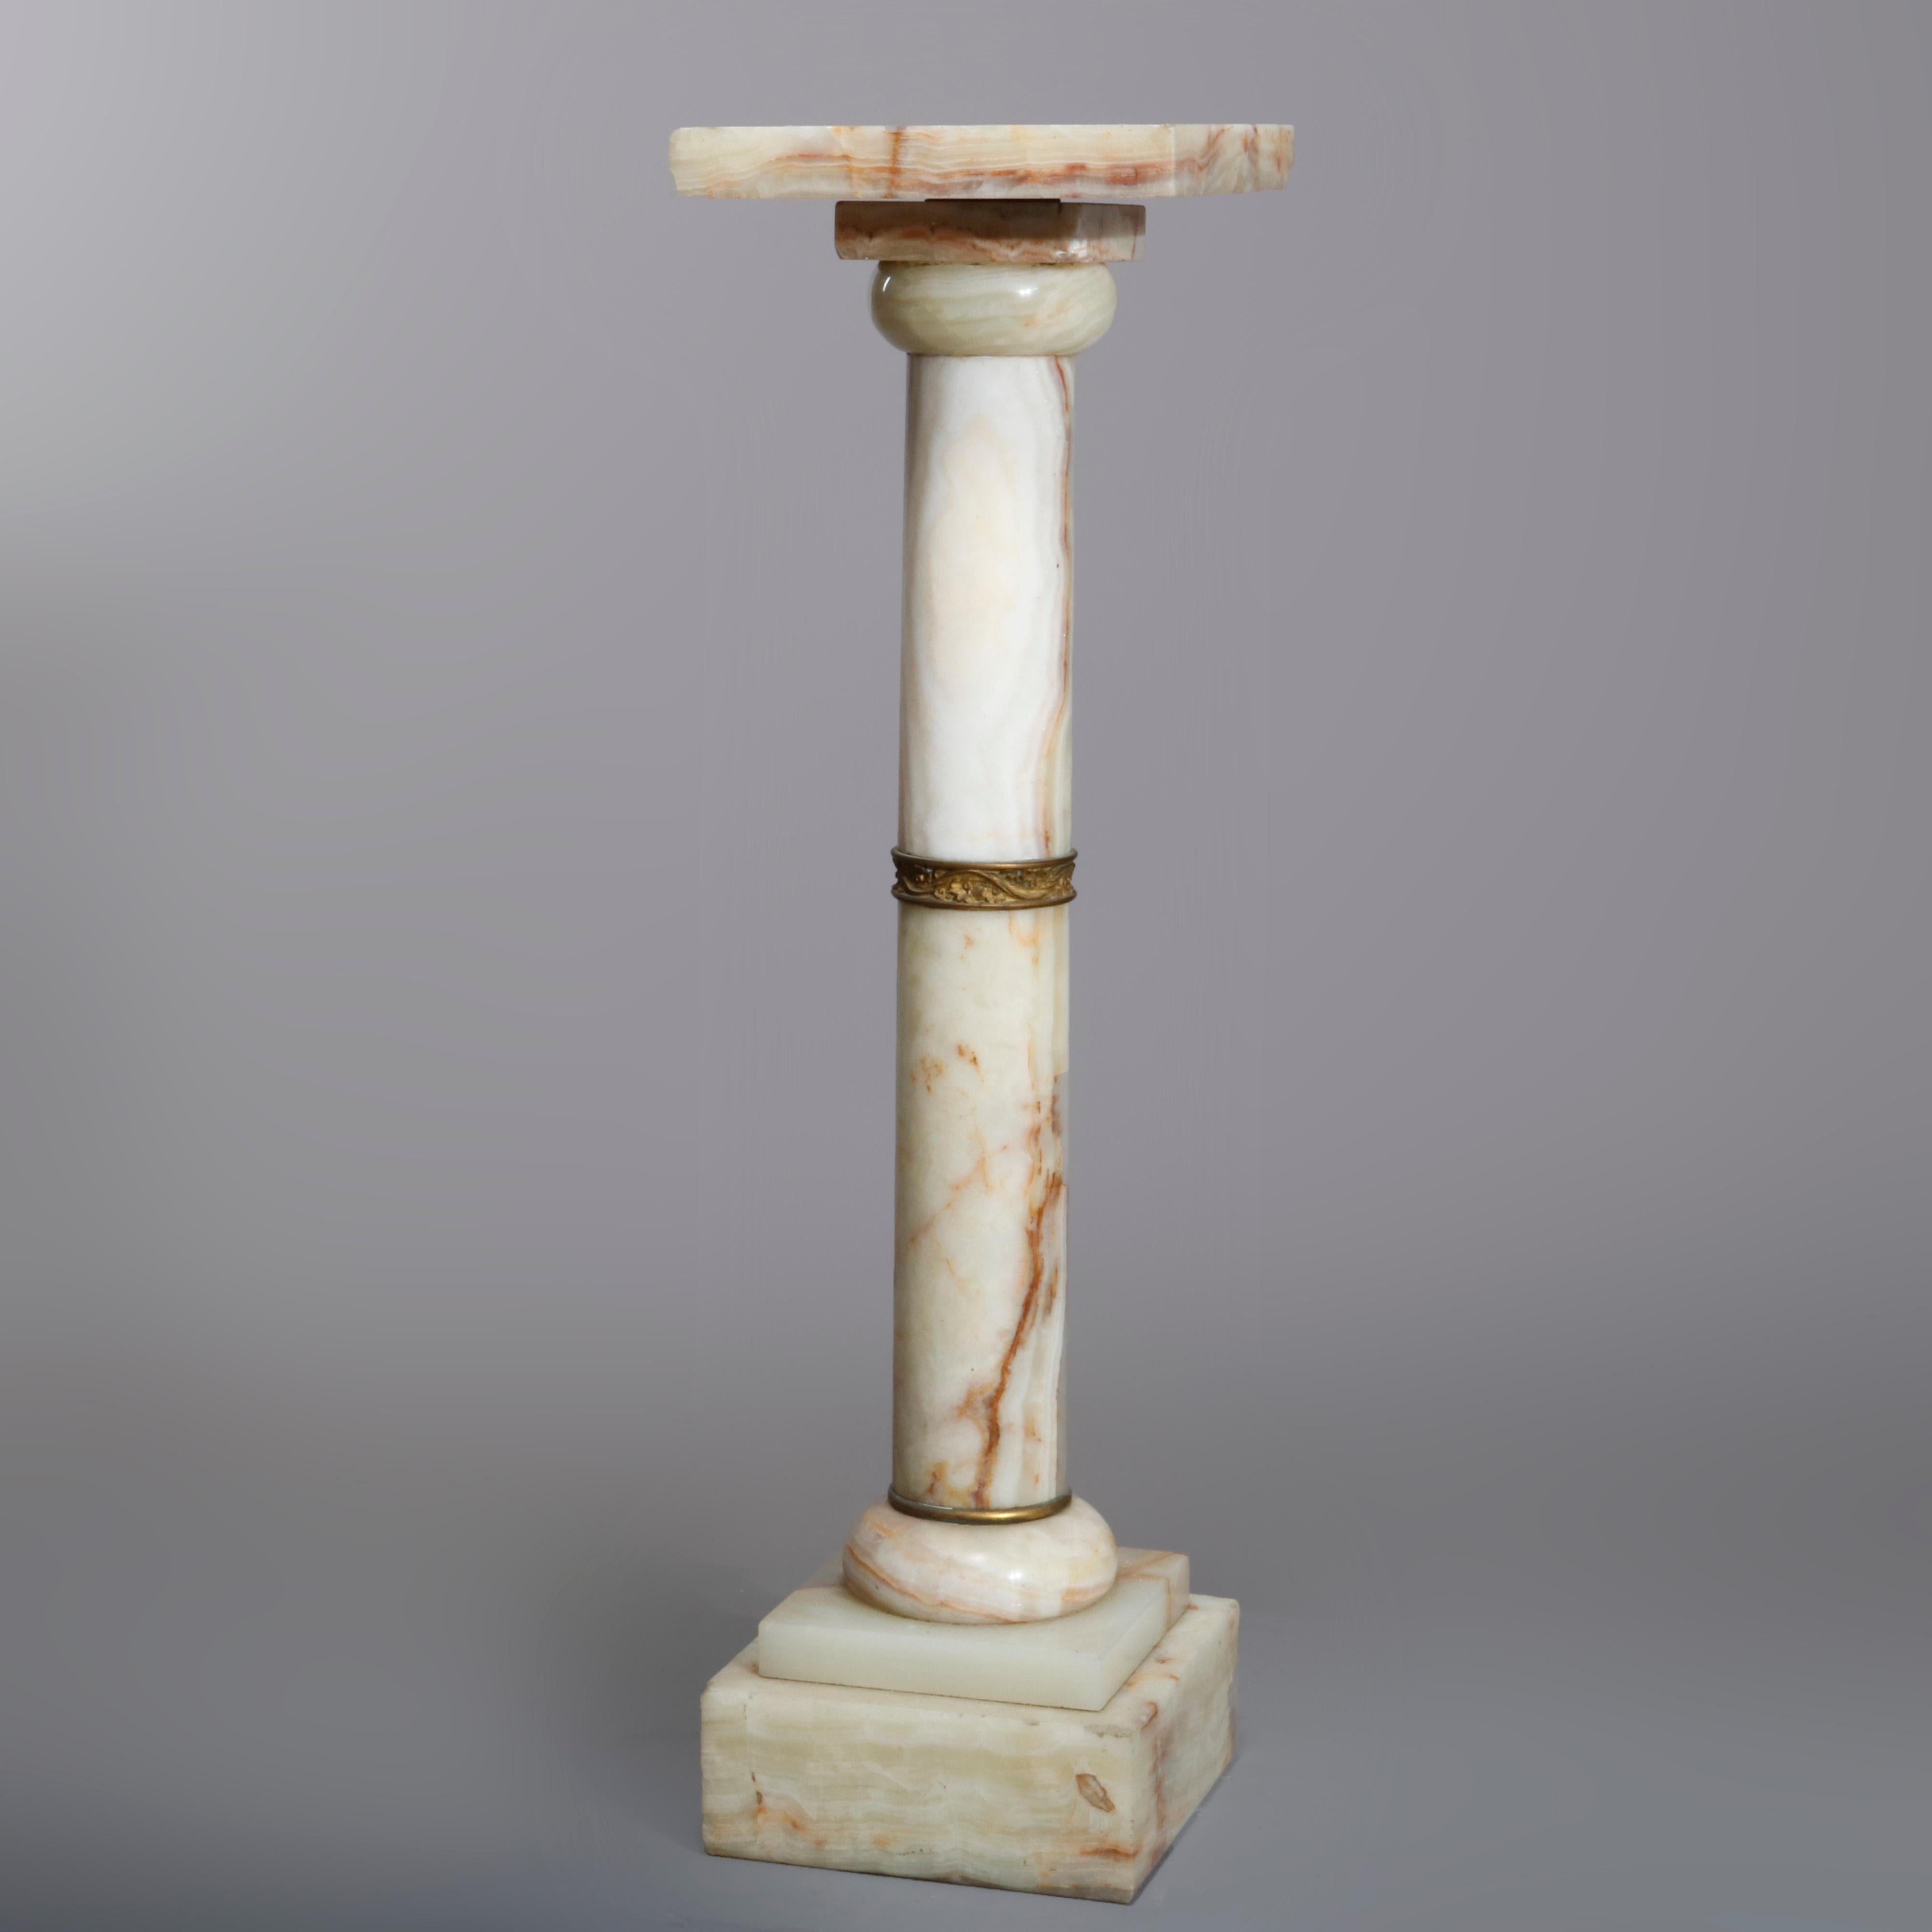 An antique sculpture display pedestal offer onyx and ormolu construction in Neoclassical Doric style column form with ormolu band, circa 1890.

Measures: 38